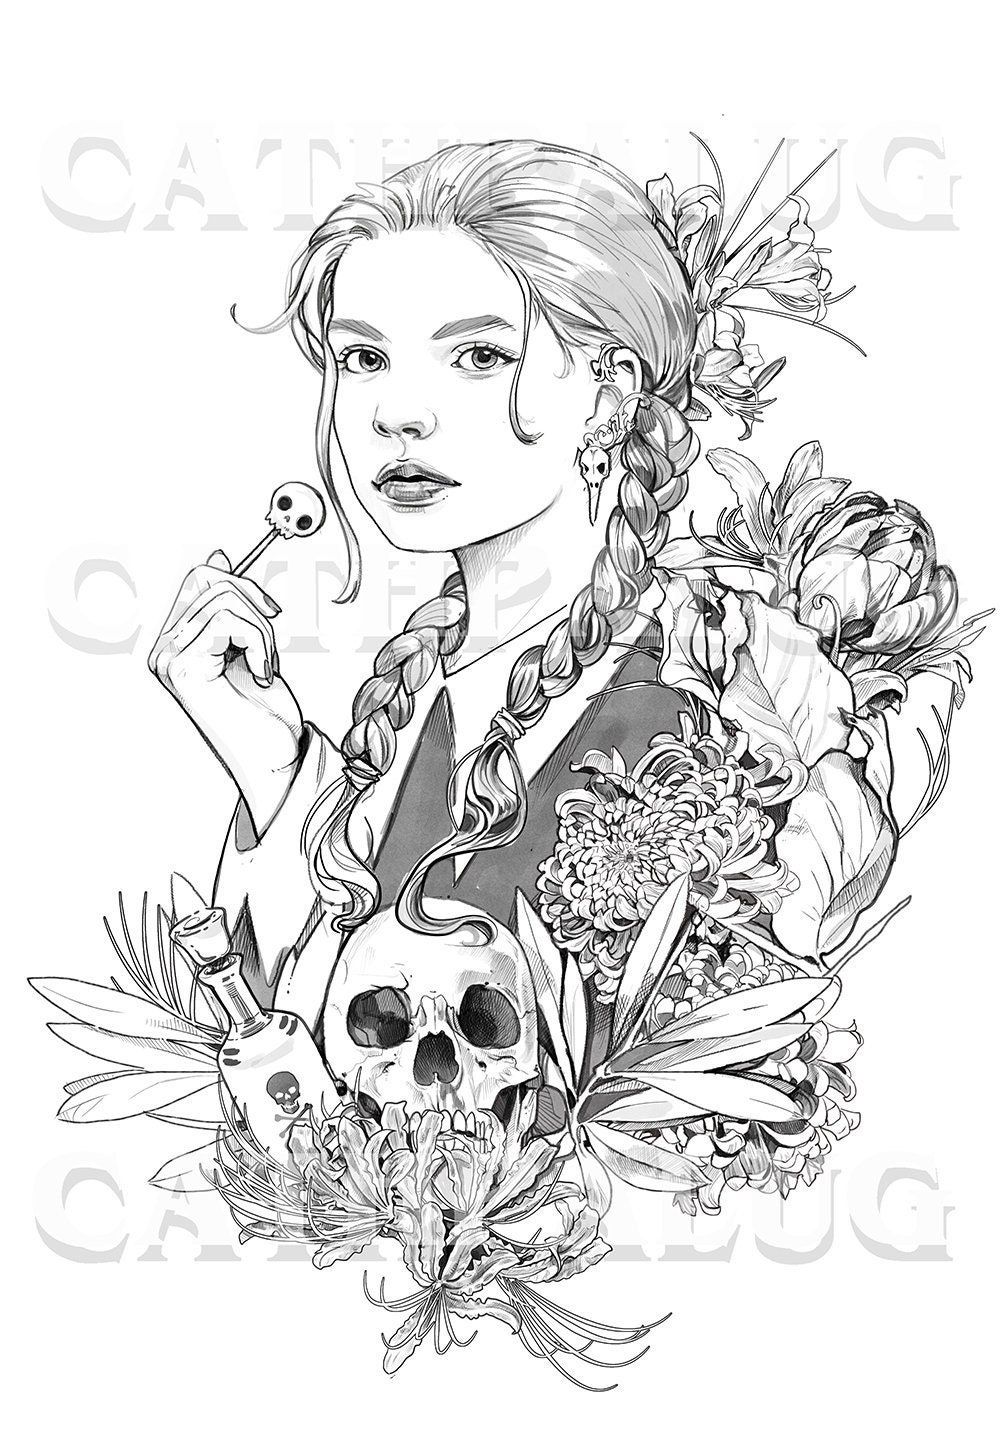 Macabre girl coloring page halloween skull flowers line art adult coloring addams family jpeg and pdf premium